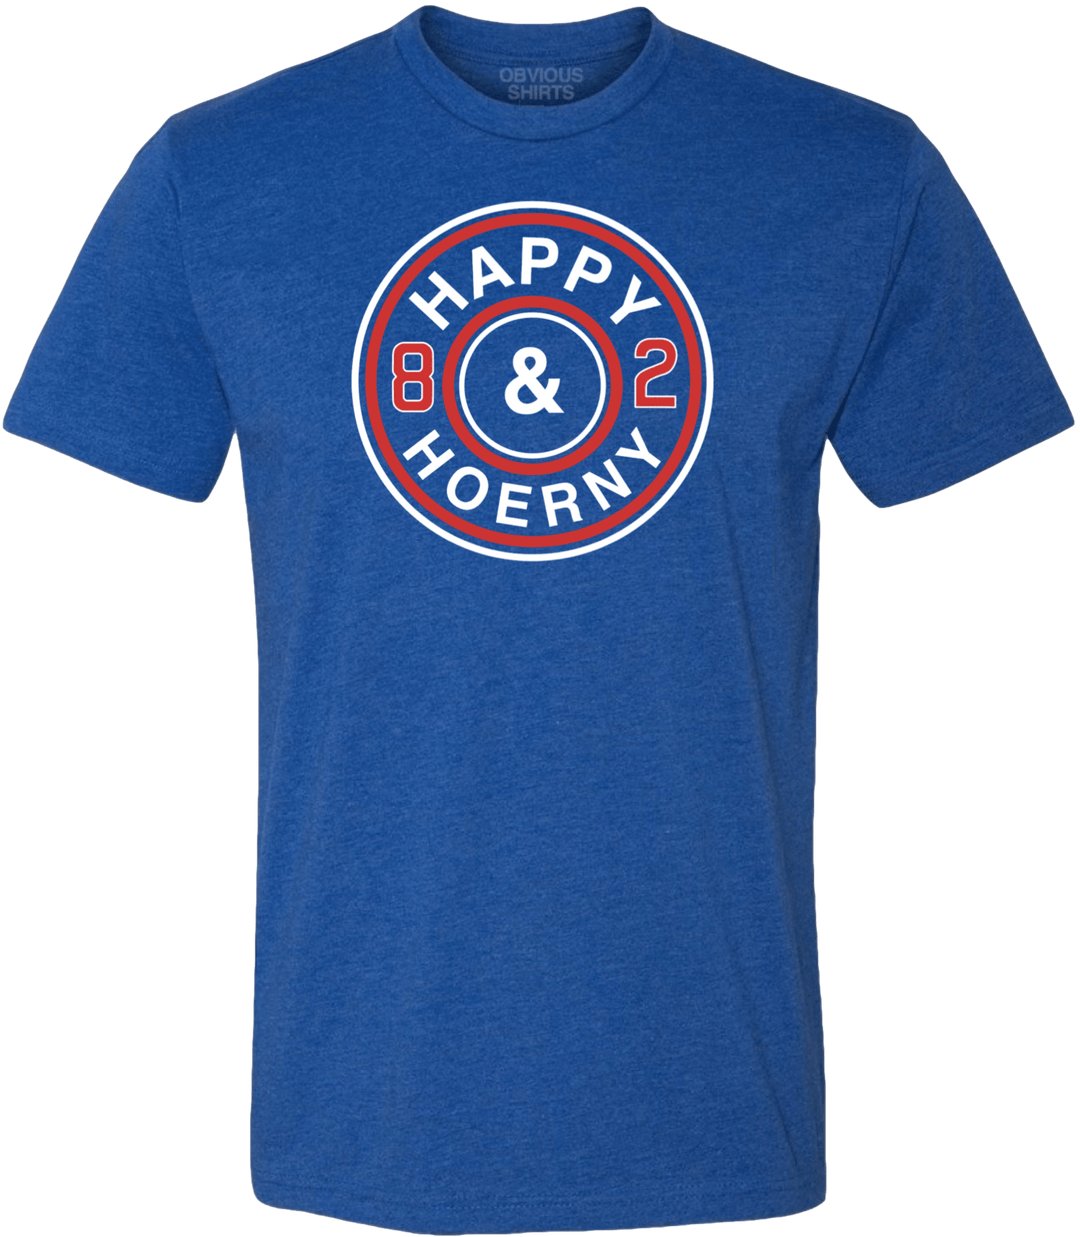 HAPPY & HOERNY - OBVIOUS SHIRTS